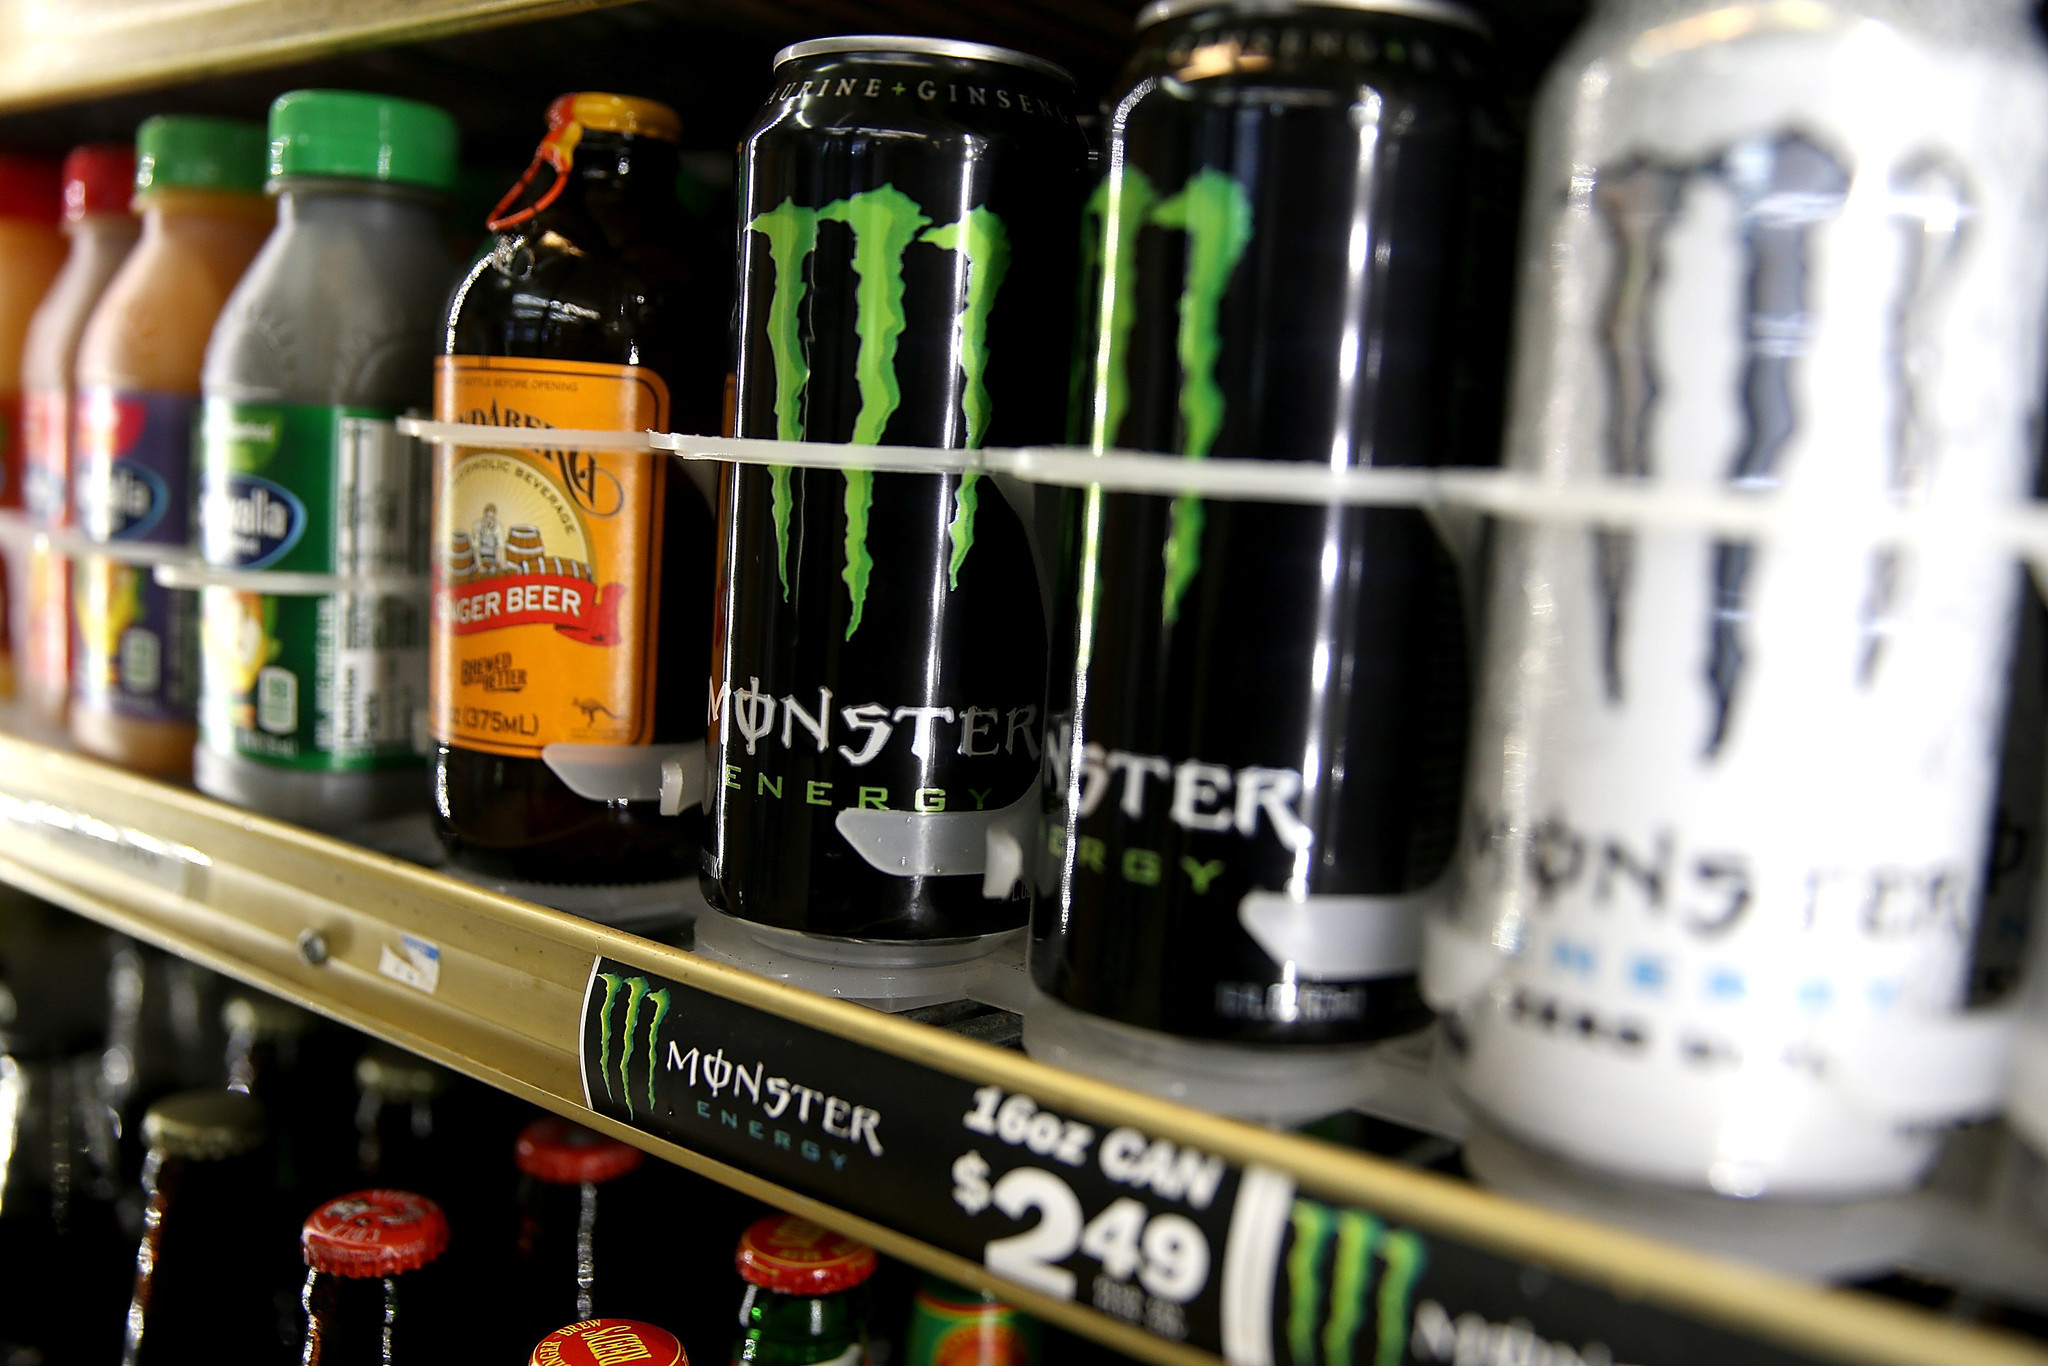 Download Energy drinks are killing teenagers. This has to stop ...